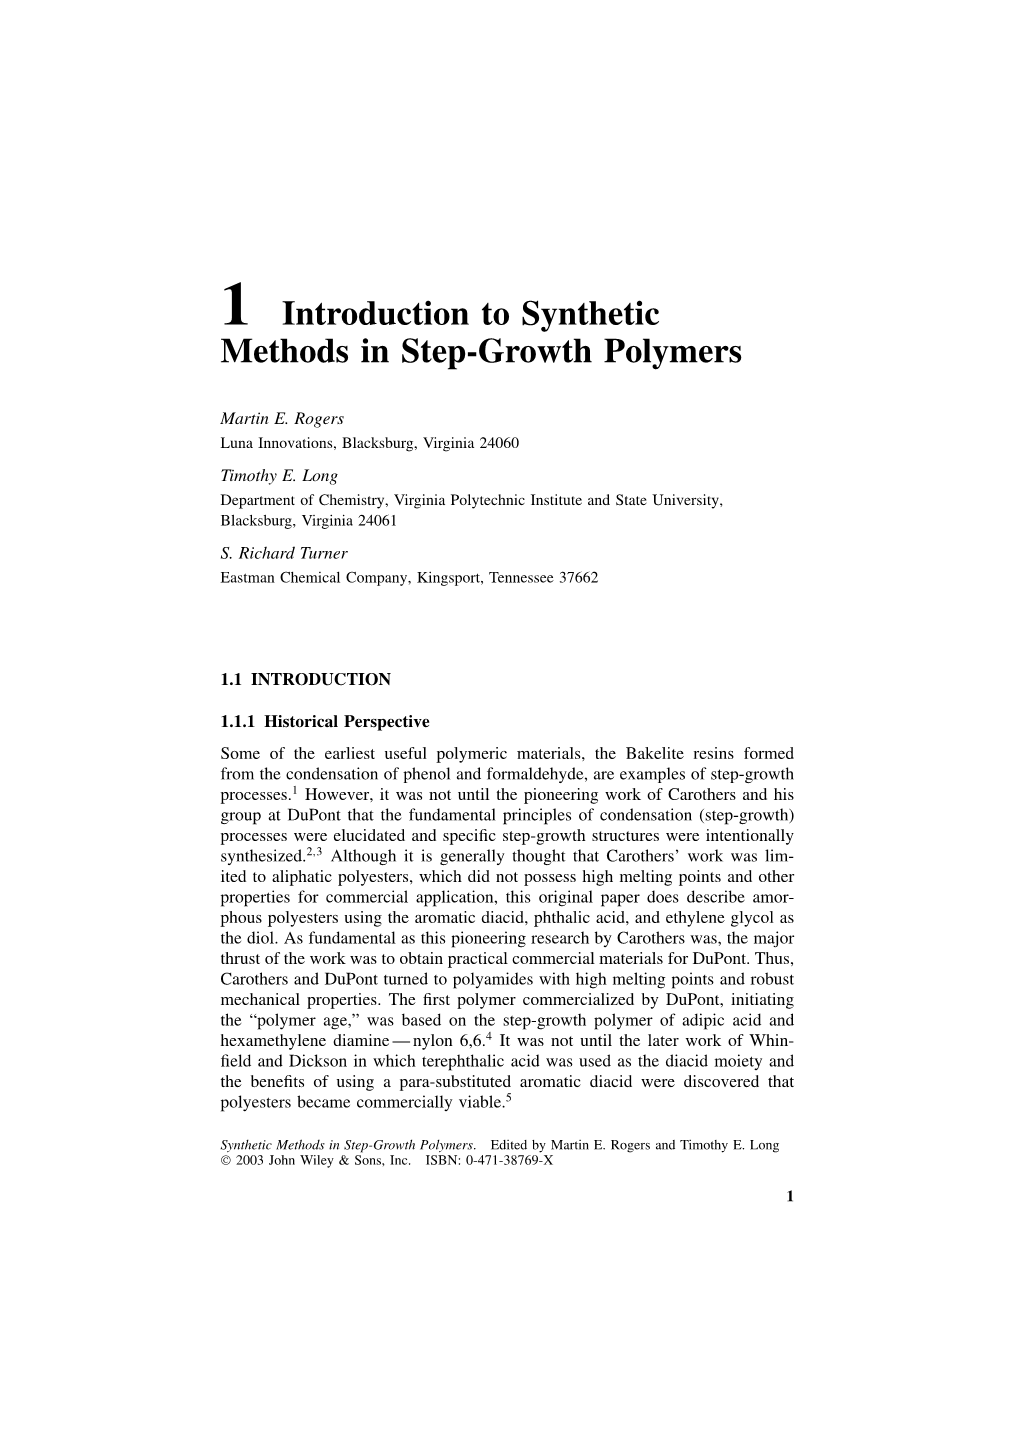 1 Introduction to Synthetic Methods in Step-Growth Polymers